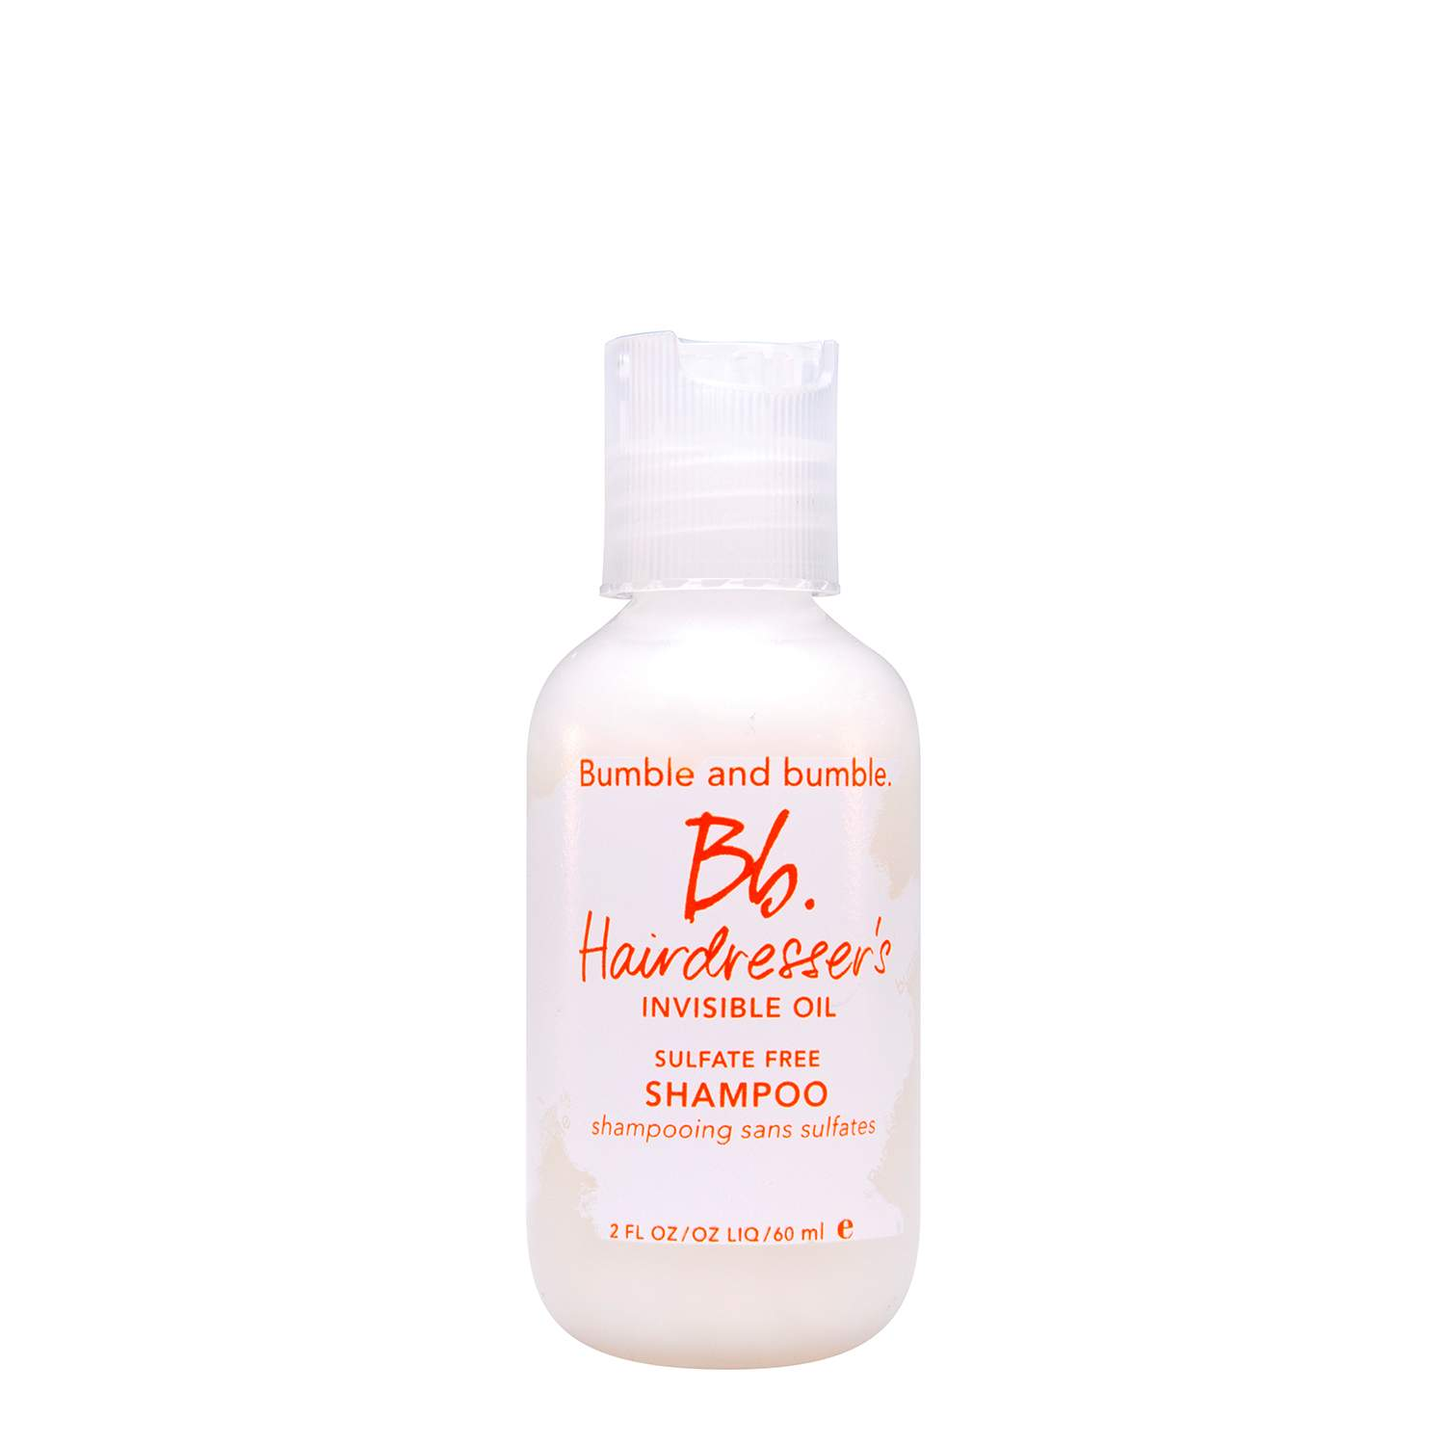 Bumble and bumble. Hairdresser's Invisible Oil Shampoo - Travel Size